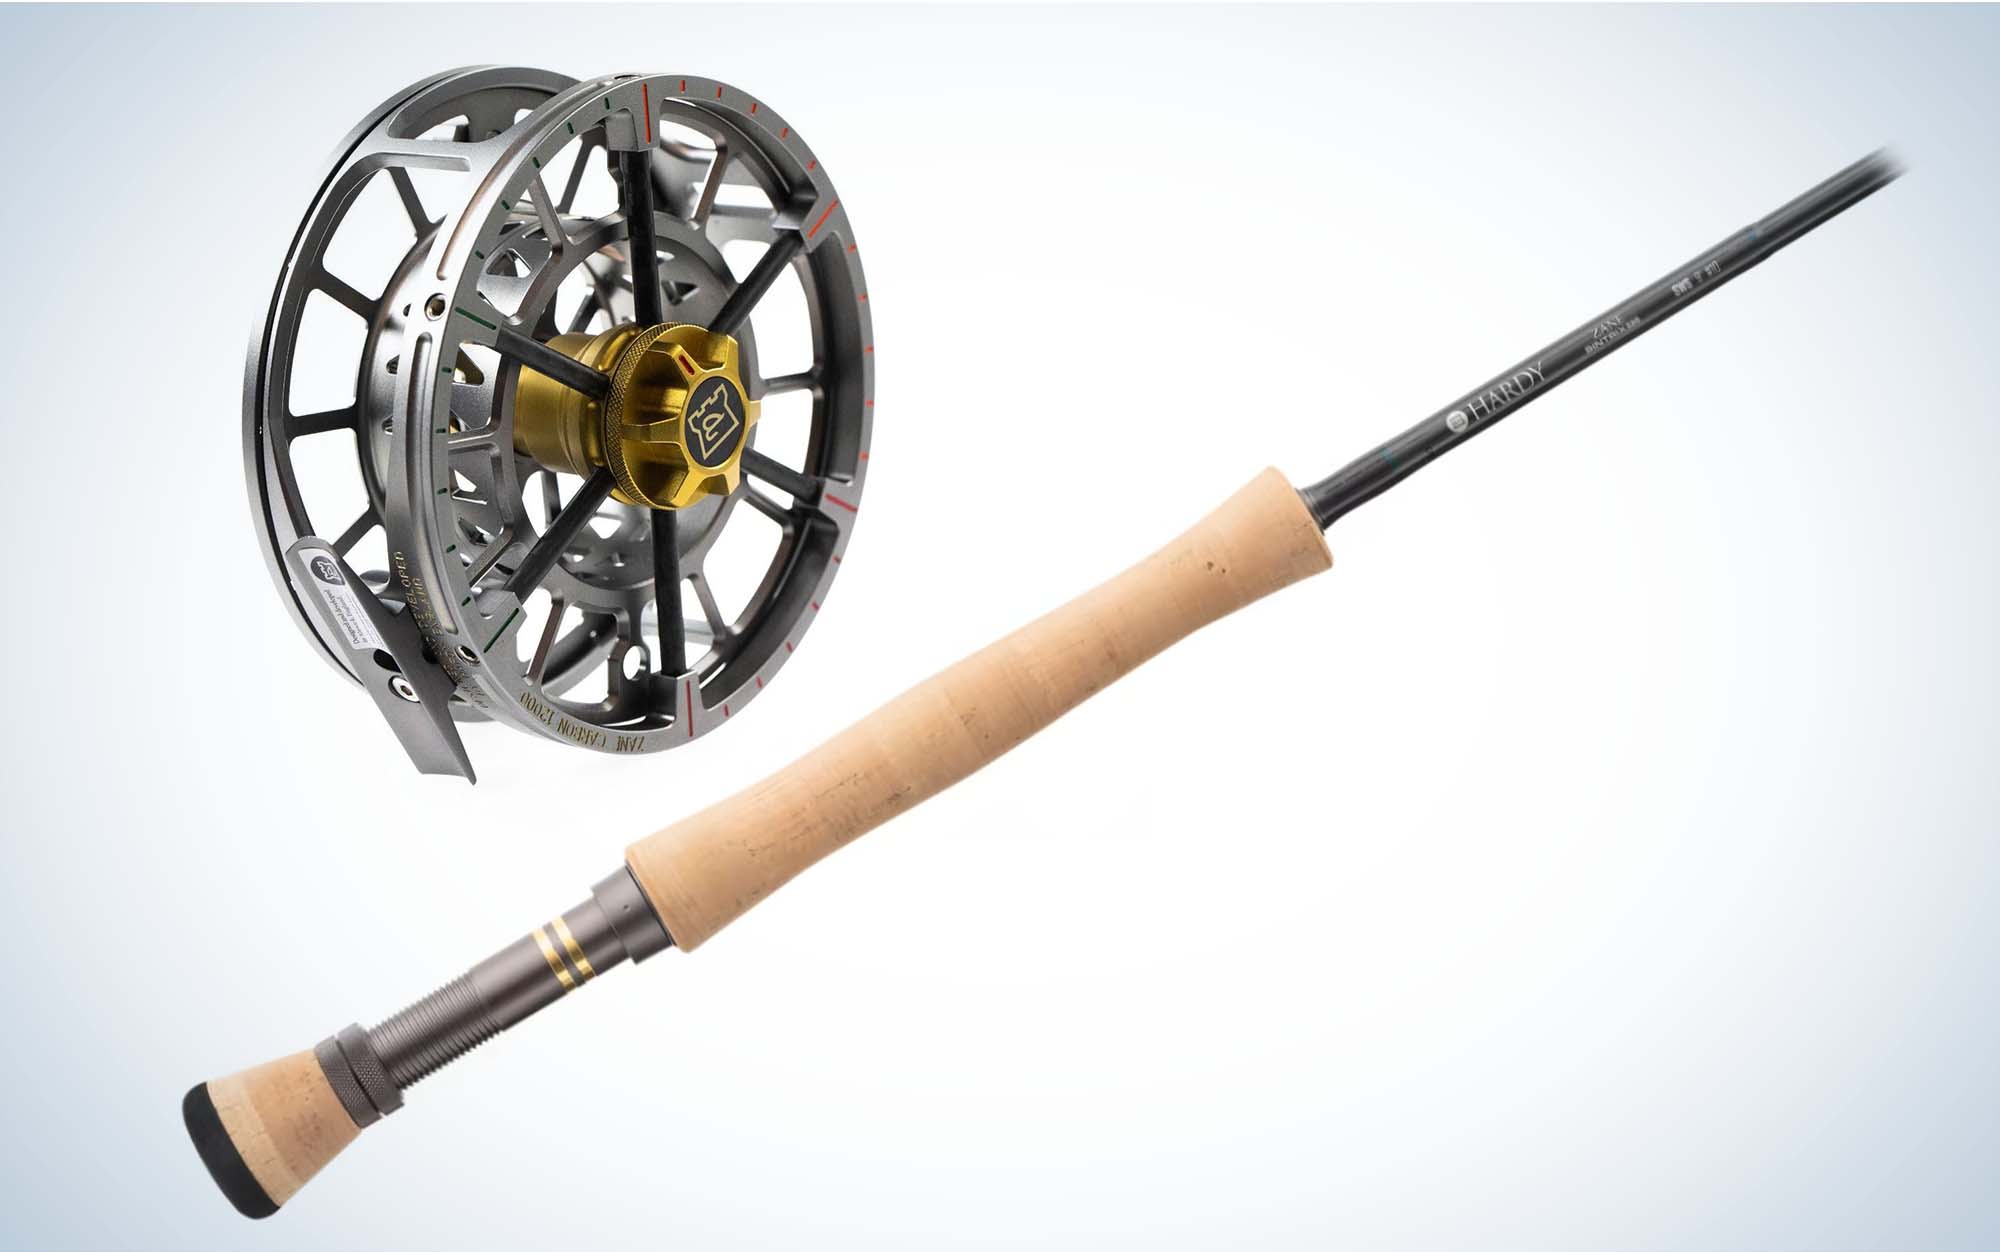 Review of the Orvis Encounter - Best Beginner Fly Rod Combo